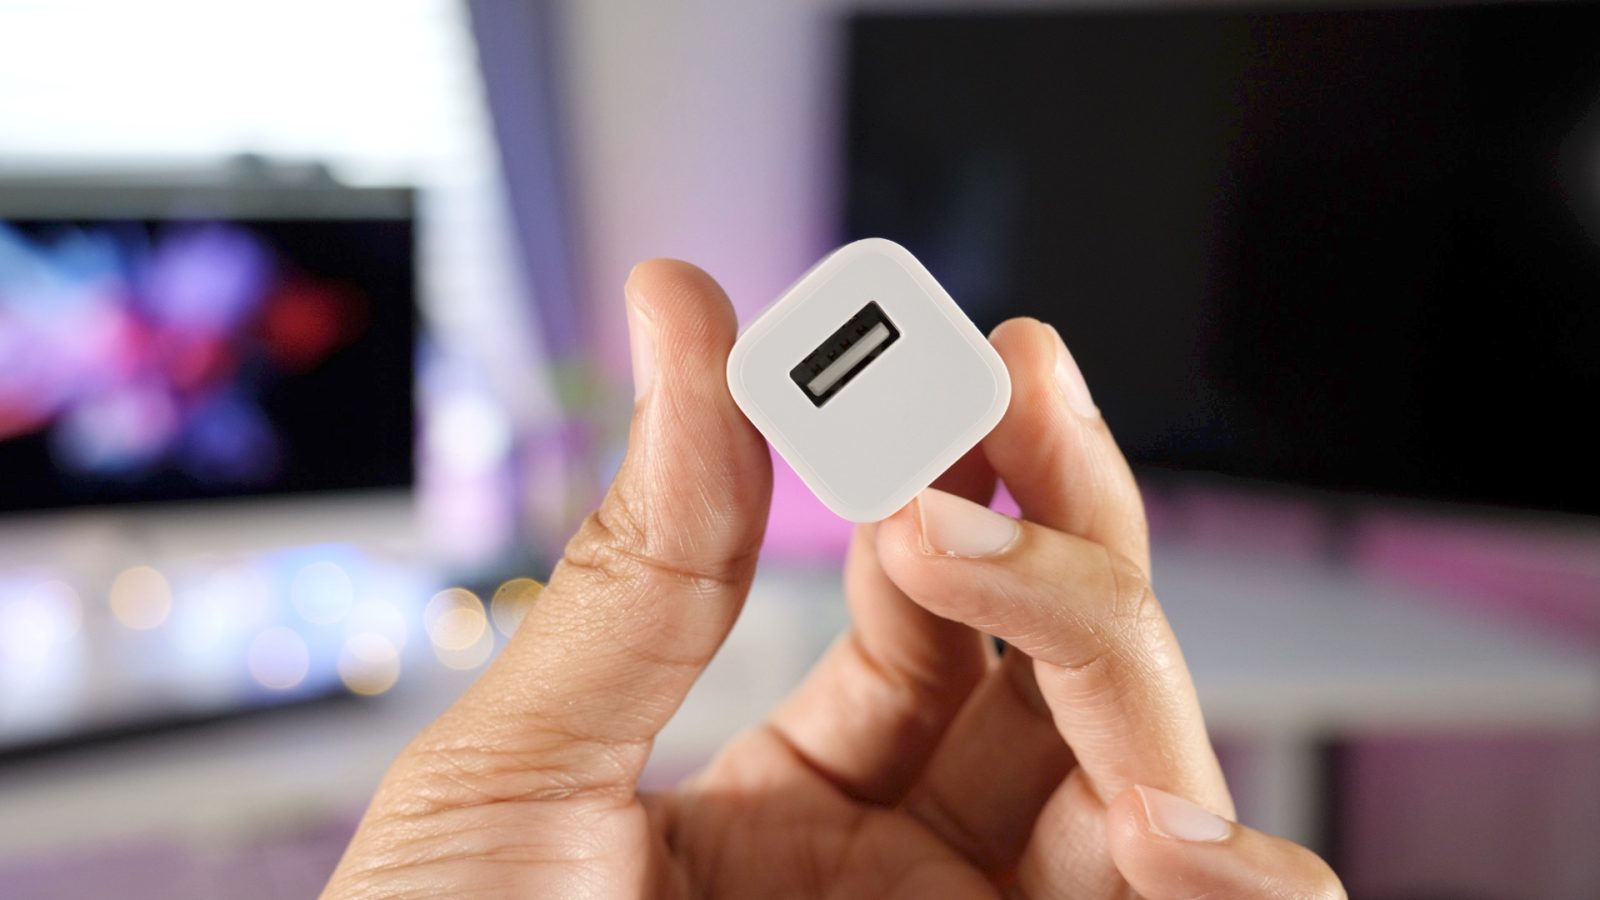 Apple 5W USB Power Adapter now sold out